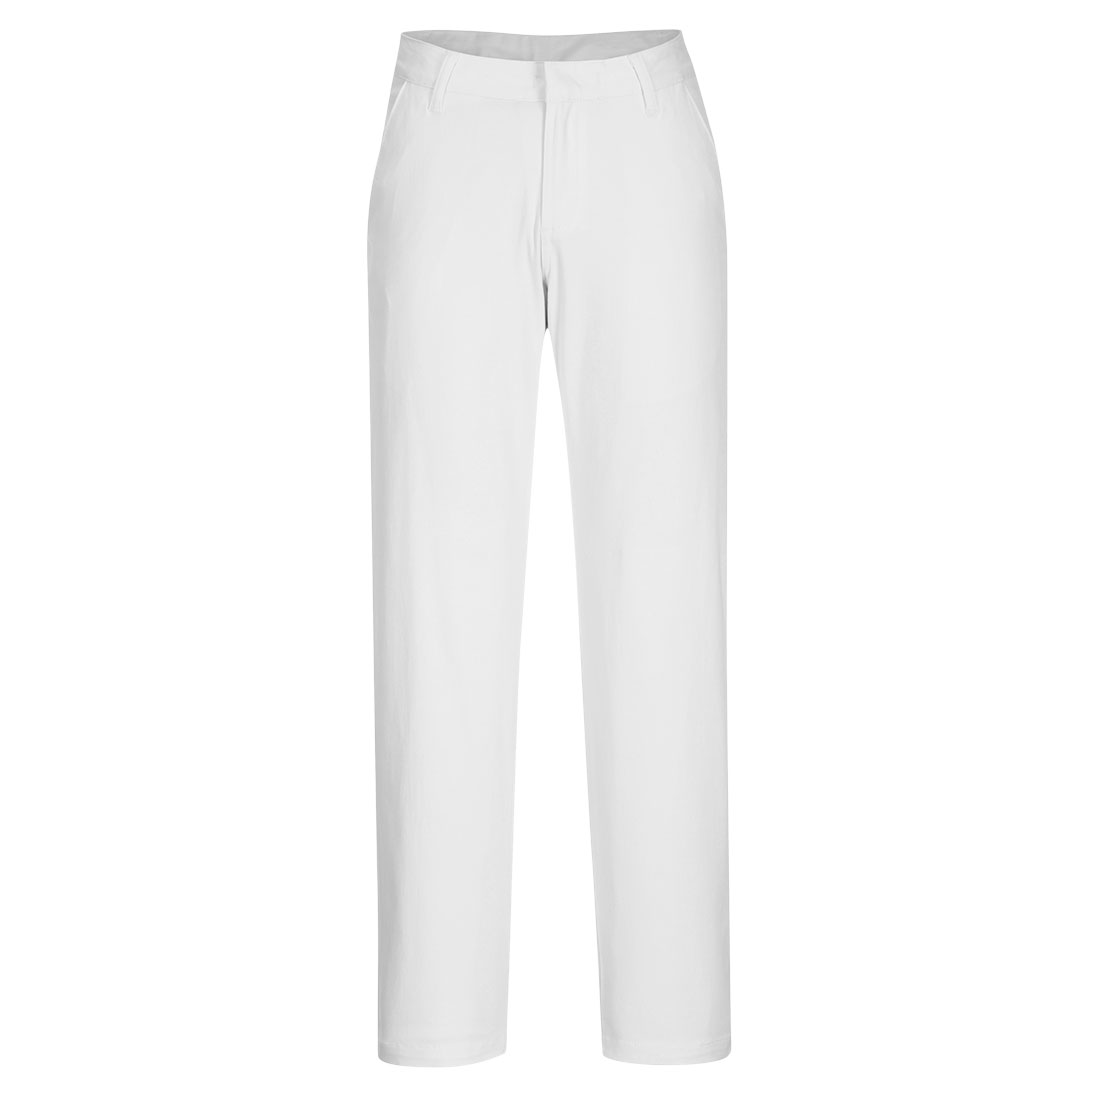 Women's Slim Chino Trouser S235 White Size 26 Fit R